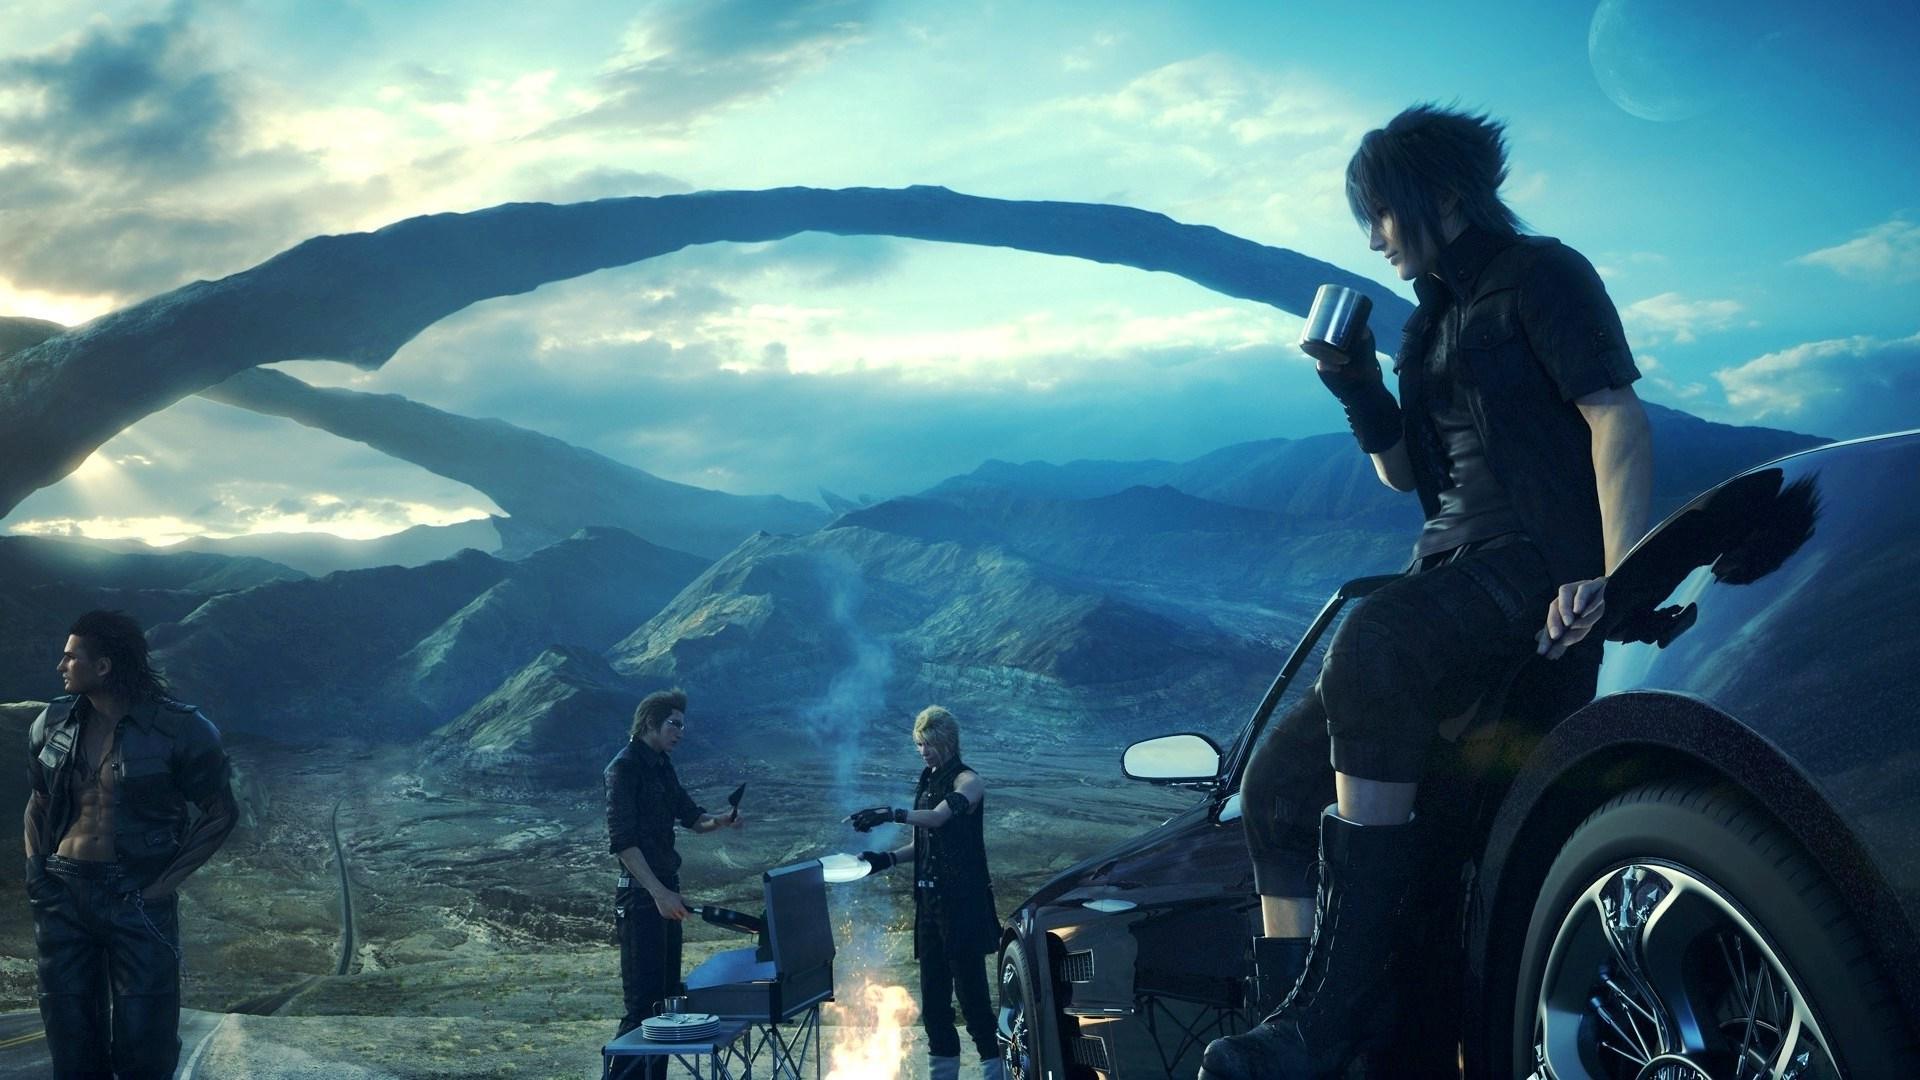 Relieve The Sting Of Delay With These Final Fantasy XV Videos